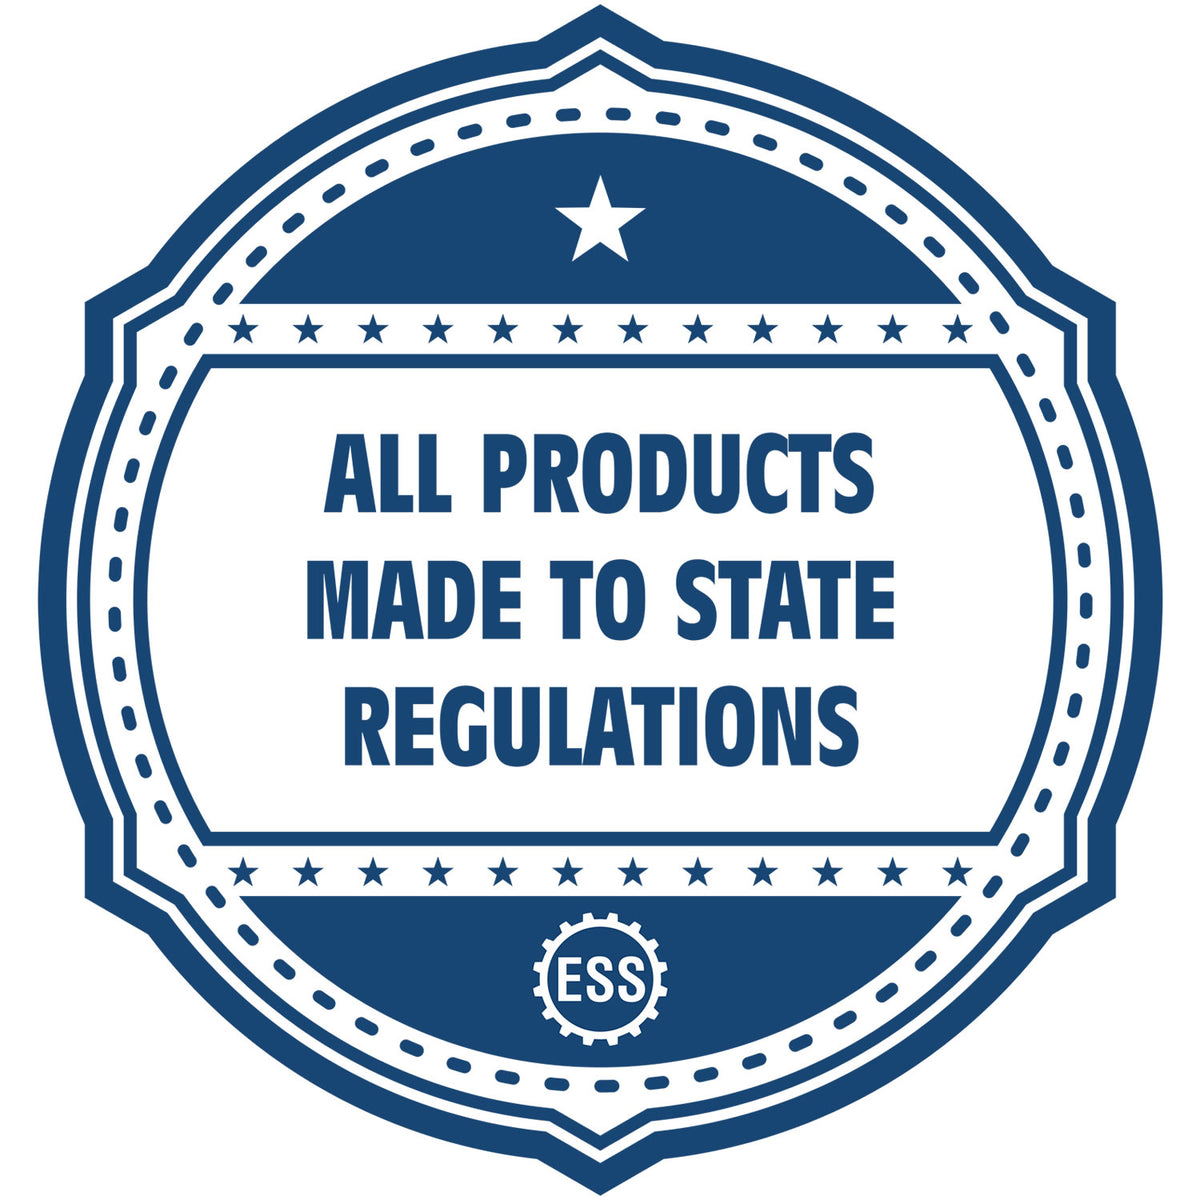 An icon or badge element for the Long Reach Massachusetts Land Surveyor Seal showing that this product is made in compliance with state regulations.